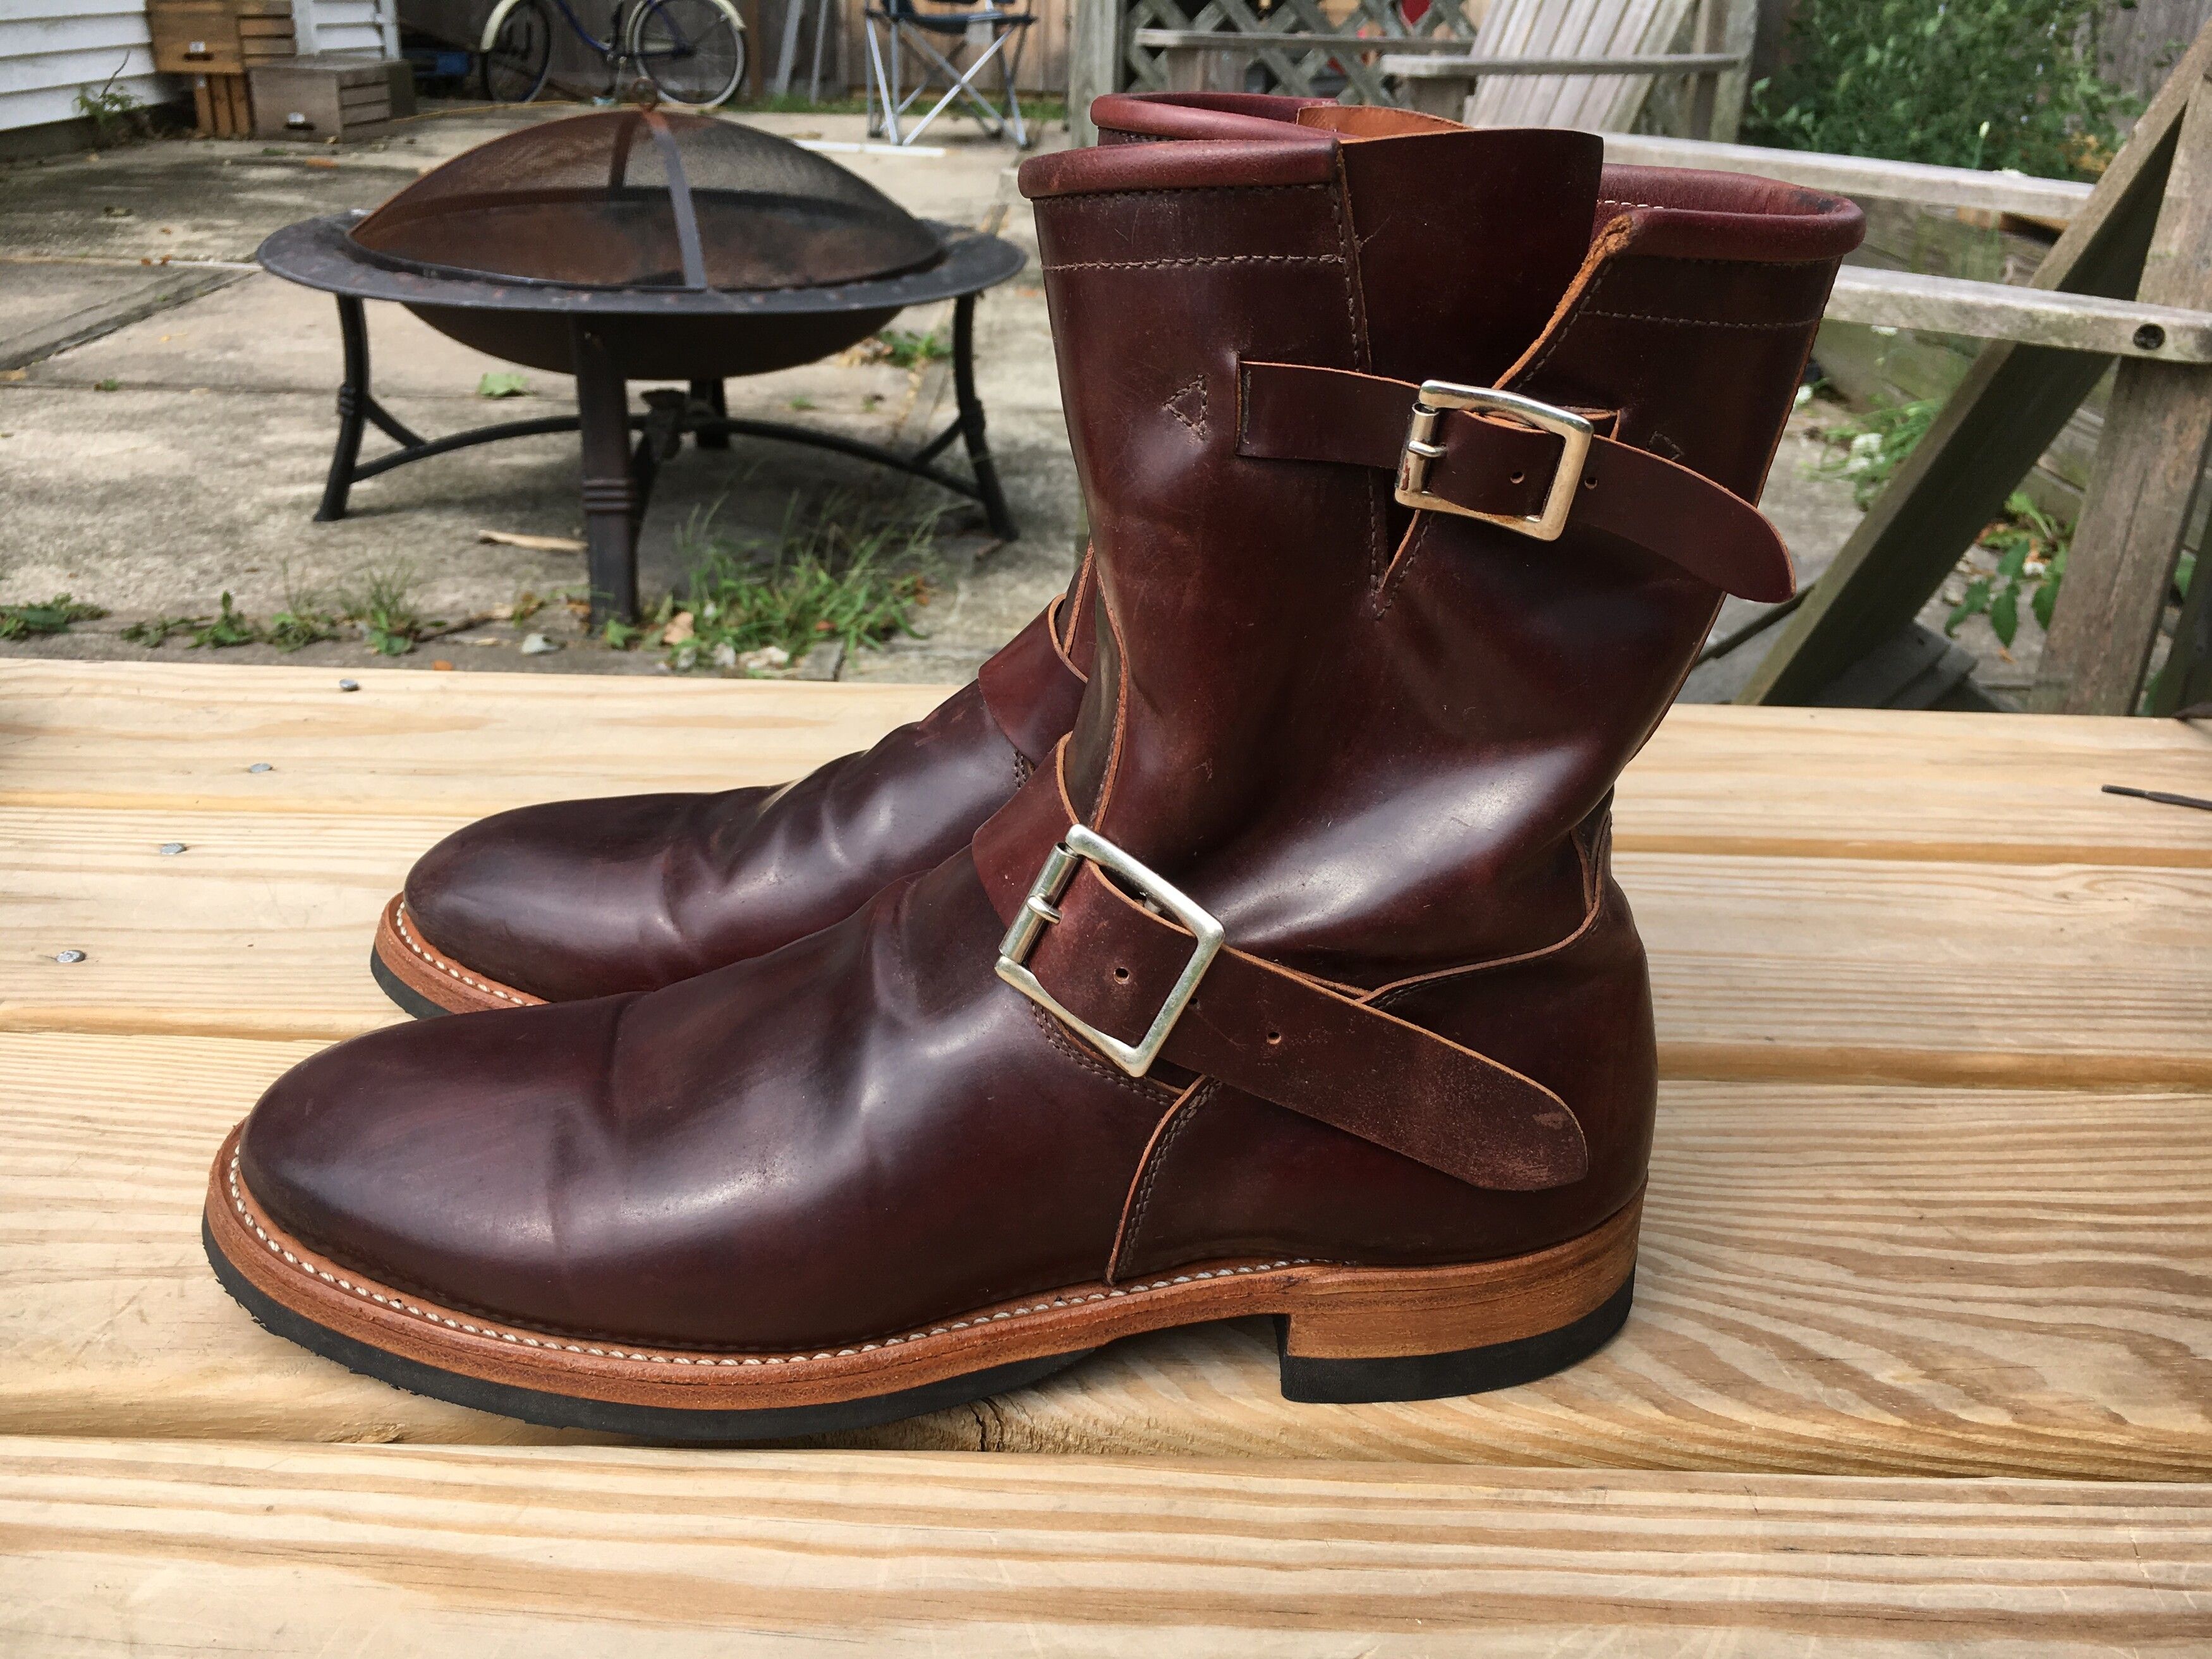 Needles Horween No. 8 Shell Cordovan Engineer Boots Size US 10 / EU 43 - 1 Preview